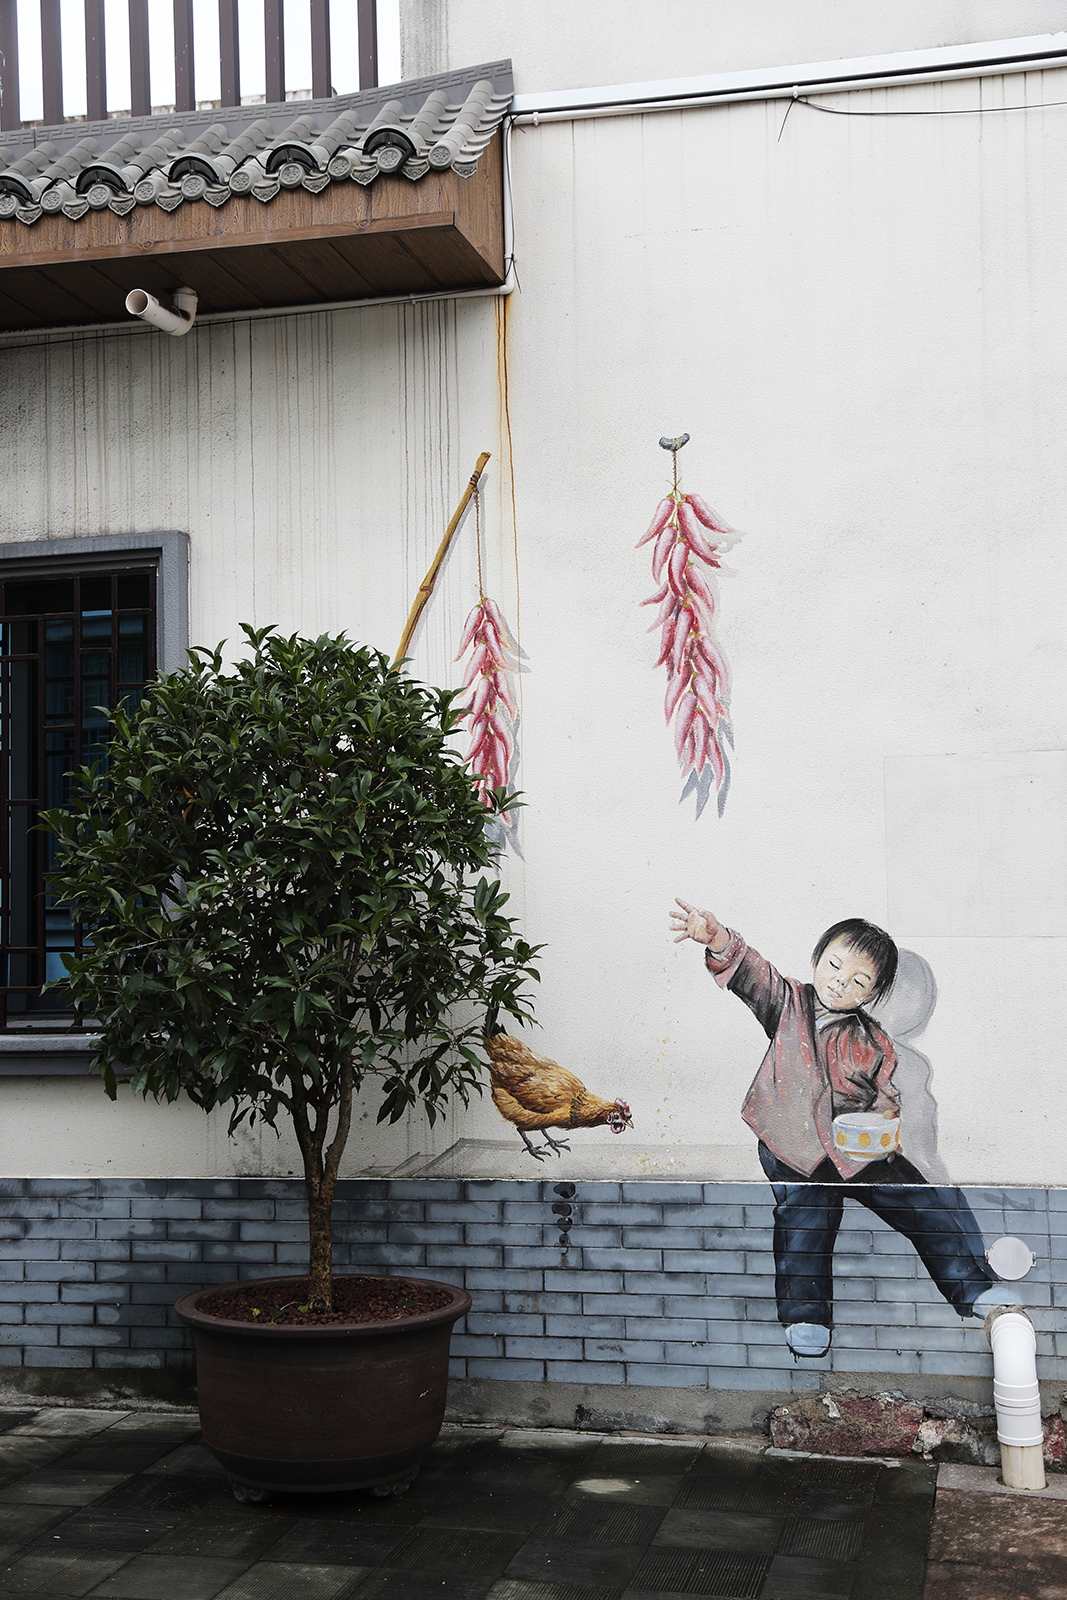 Walls are adorned with paintings that depict vibrant scenes of rural life in Lizu Village in Yiwu, Zhejiang Province. /CGTN